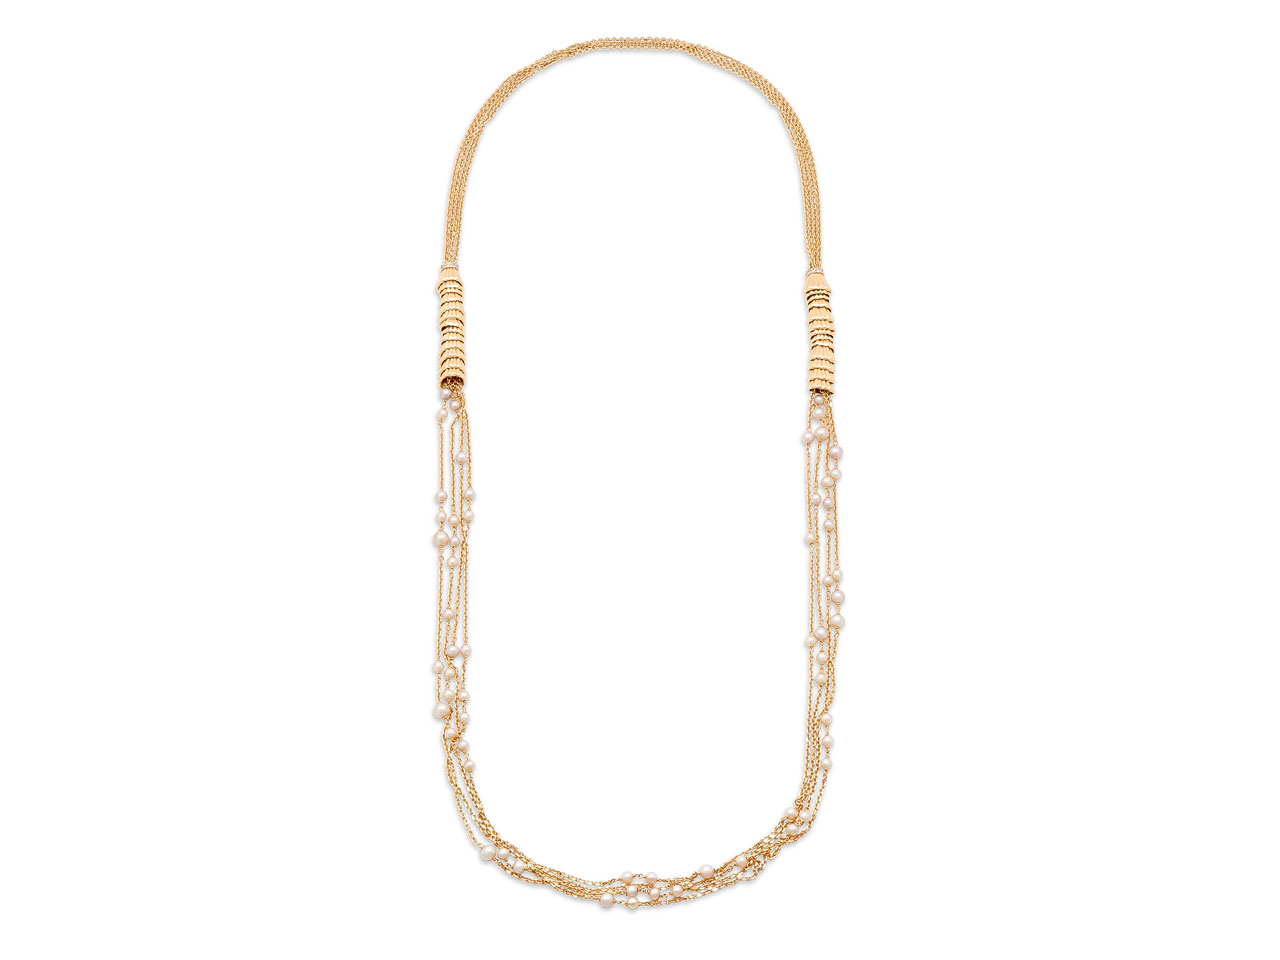 Boucheron 'Frou Frou' Pearl and Diamond Necklace in 18K Rose Gold